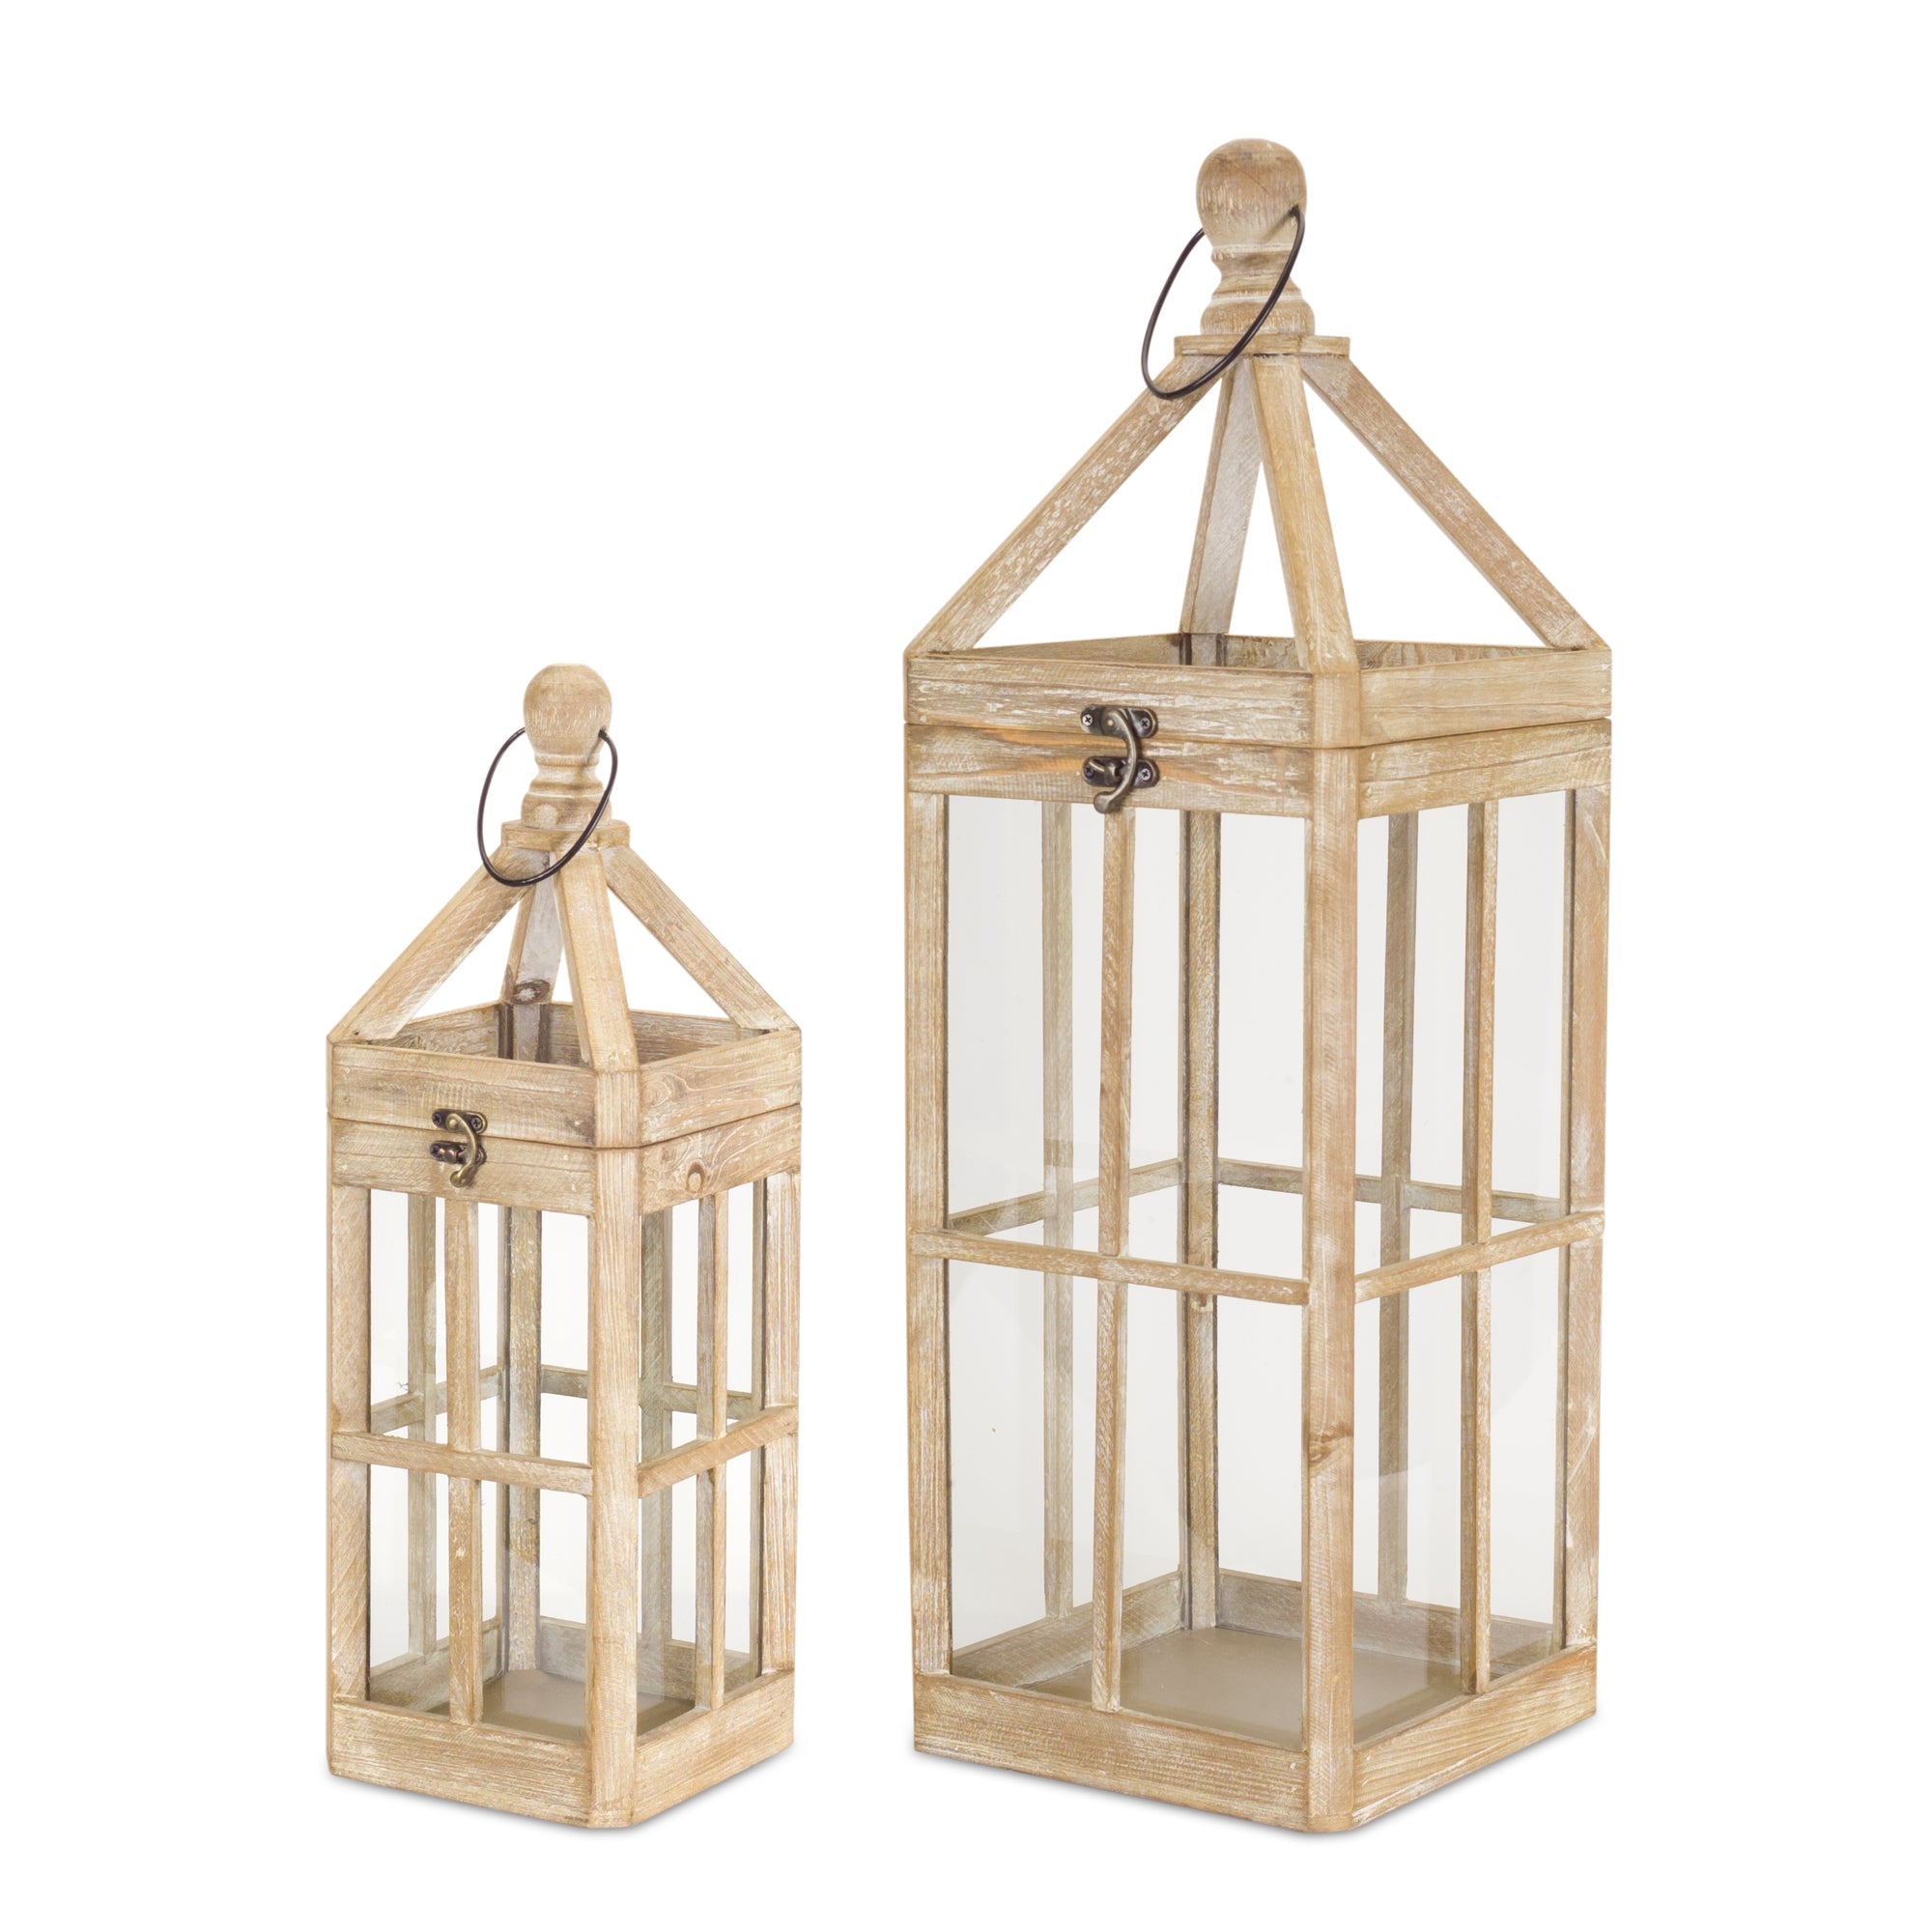 Set-of-Two-Natural-and-Clear-Wood-and-Glass-Floor-Lantern-Candle-Holders-Candle-Holders